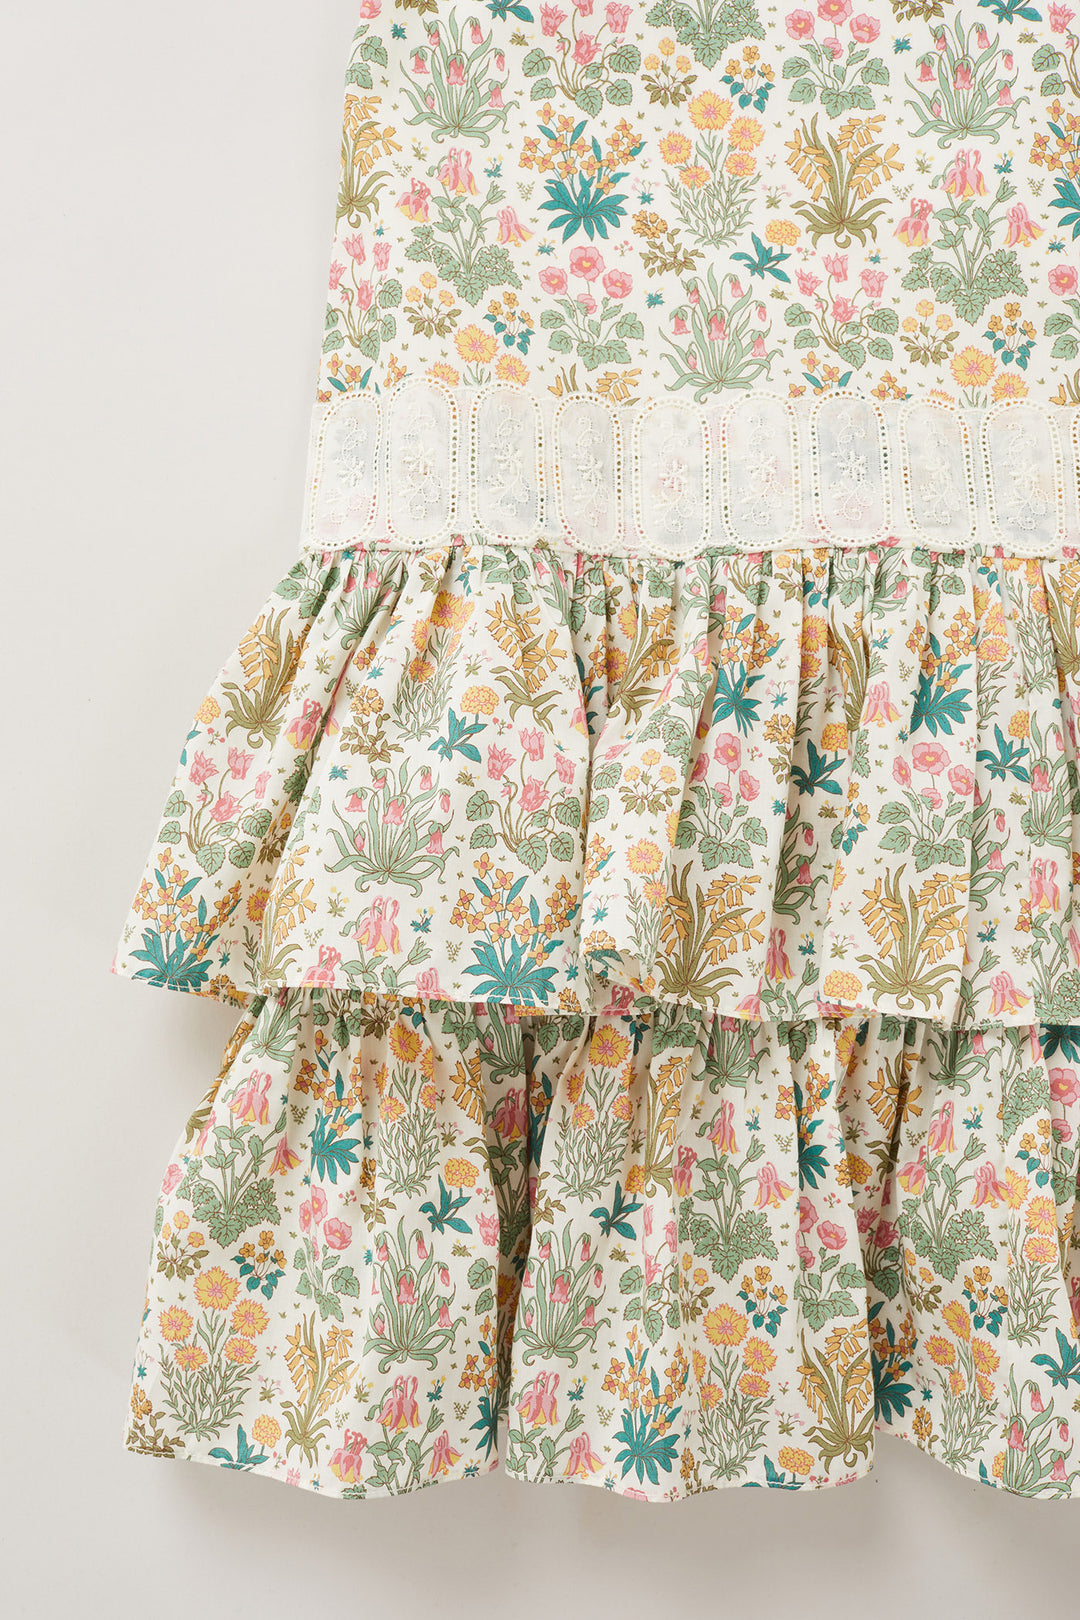 Pastry Dress in Flower Chess Liberty Print